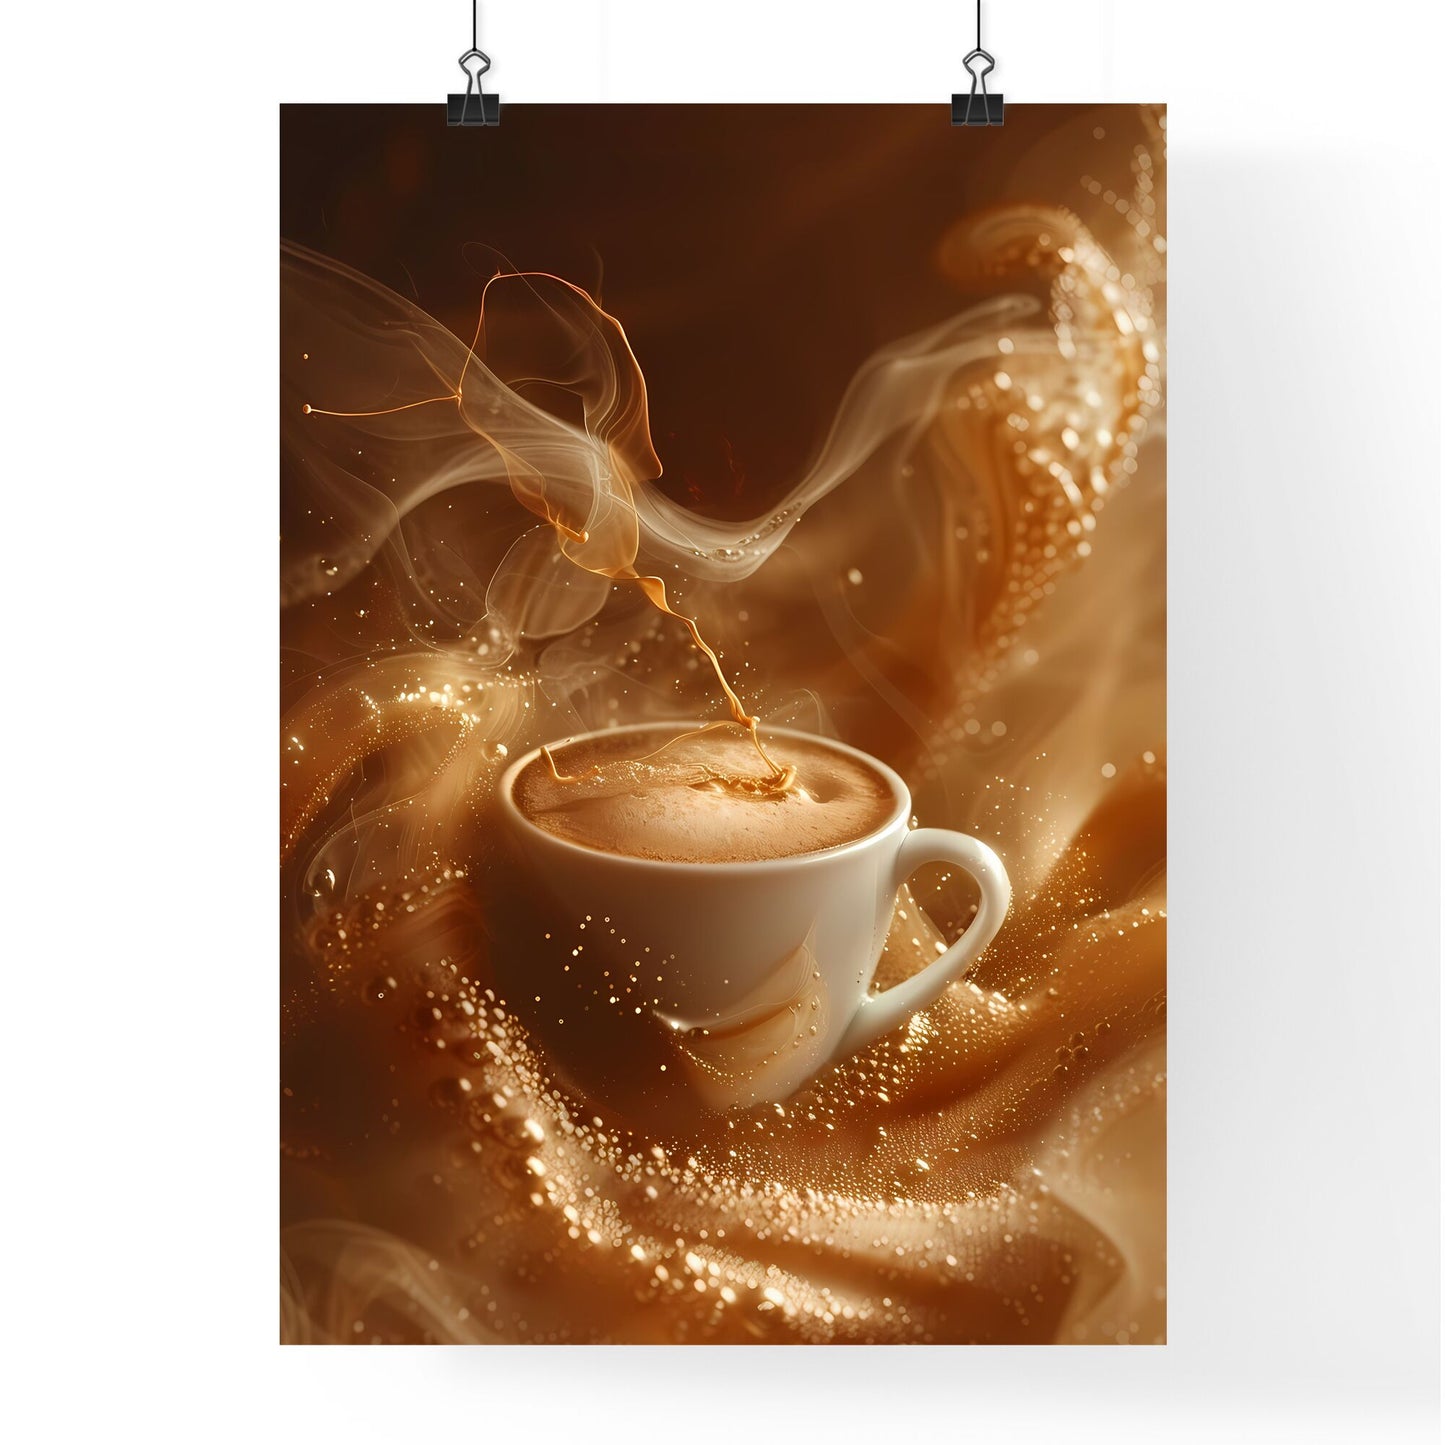 Hyper-Detailed Digital Painting: Realistic Coffee Cup Art with Vibrant Foam and Steam Default Title